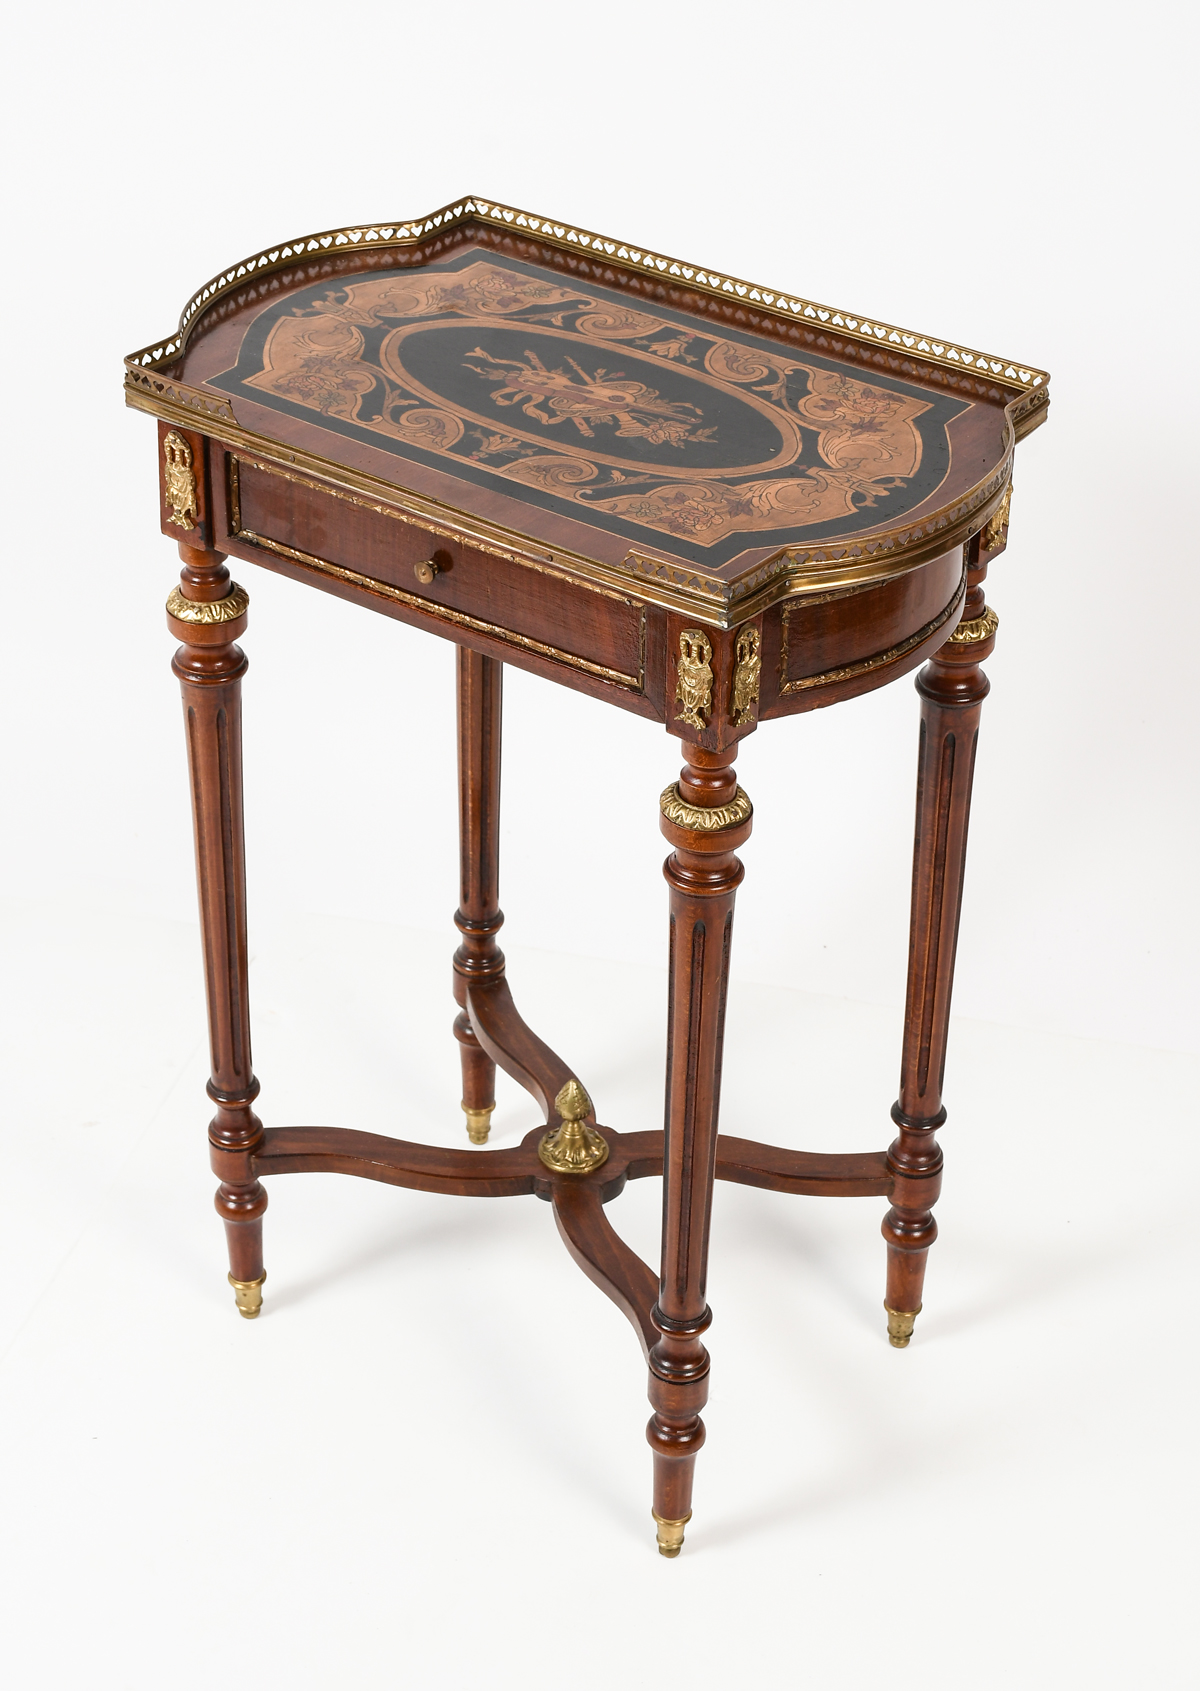 INLAID ITALIAN SIDE TABLE Gallery 36a53c